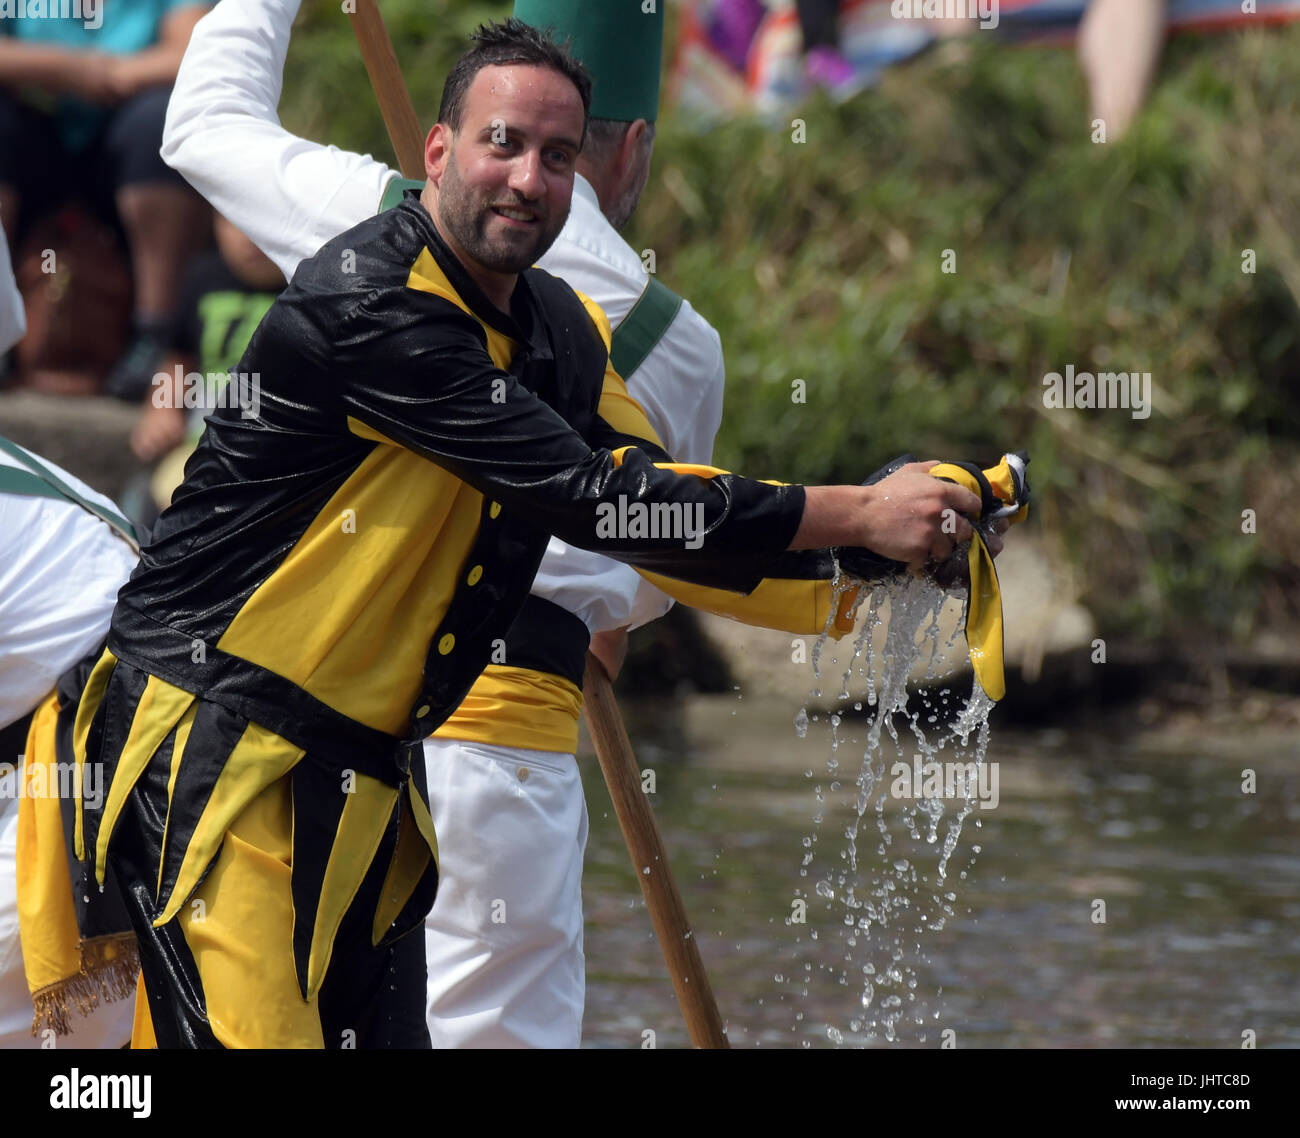 Ulm, Germany. 16th July, 2017. The jester dressed on yellow and black wrings out his soaking hat after crashing into the waters of the Danube river in Ulm, Germany, 16 July 2017. Every four years the water jousting festival takes place in Ulm - costumed participants try their best to tip each other into the Danube river with lances. Photo: Stefan Puchner/dpa/Alamy Live News Stock Photo